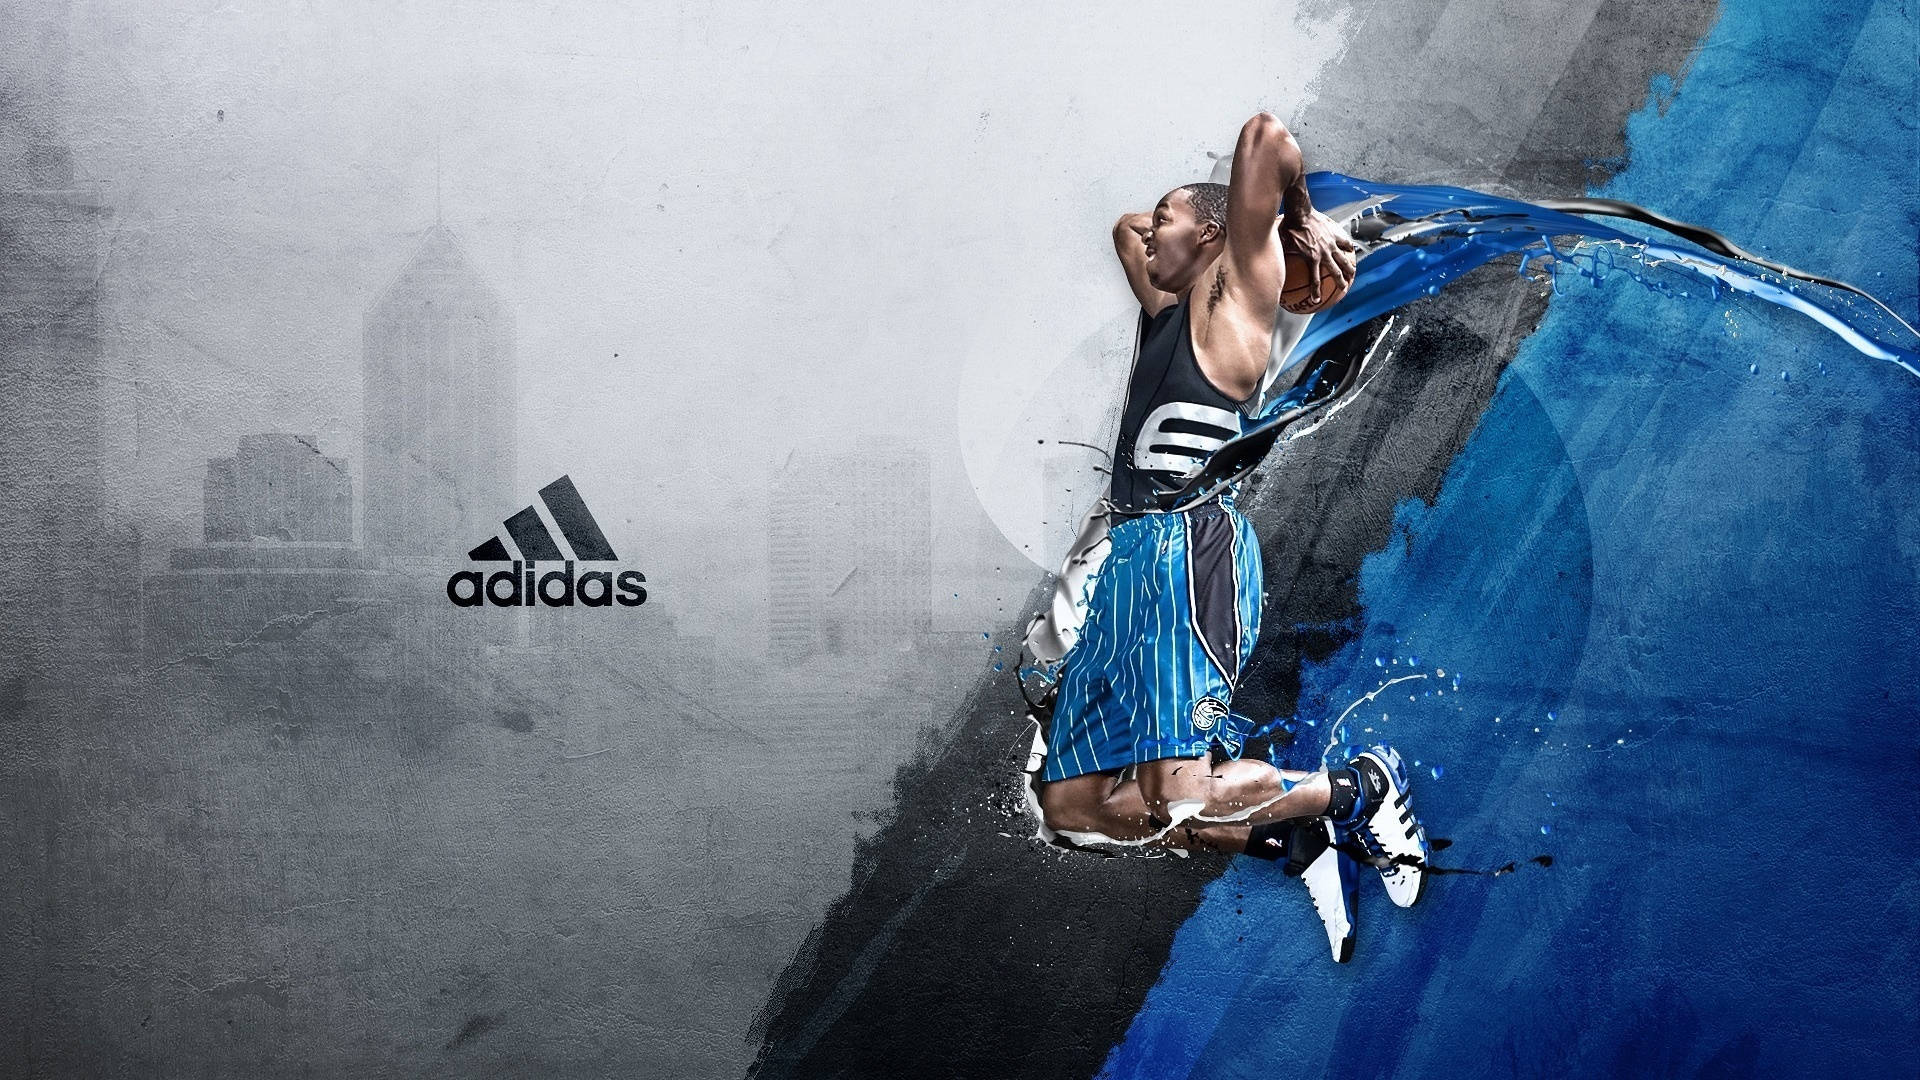 Athletic Themed Adidas Poster Background